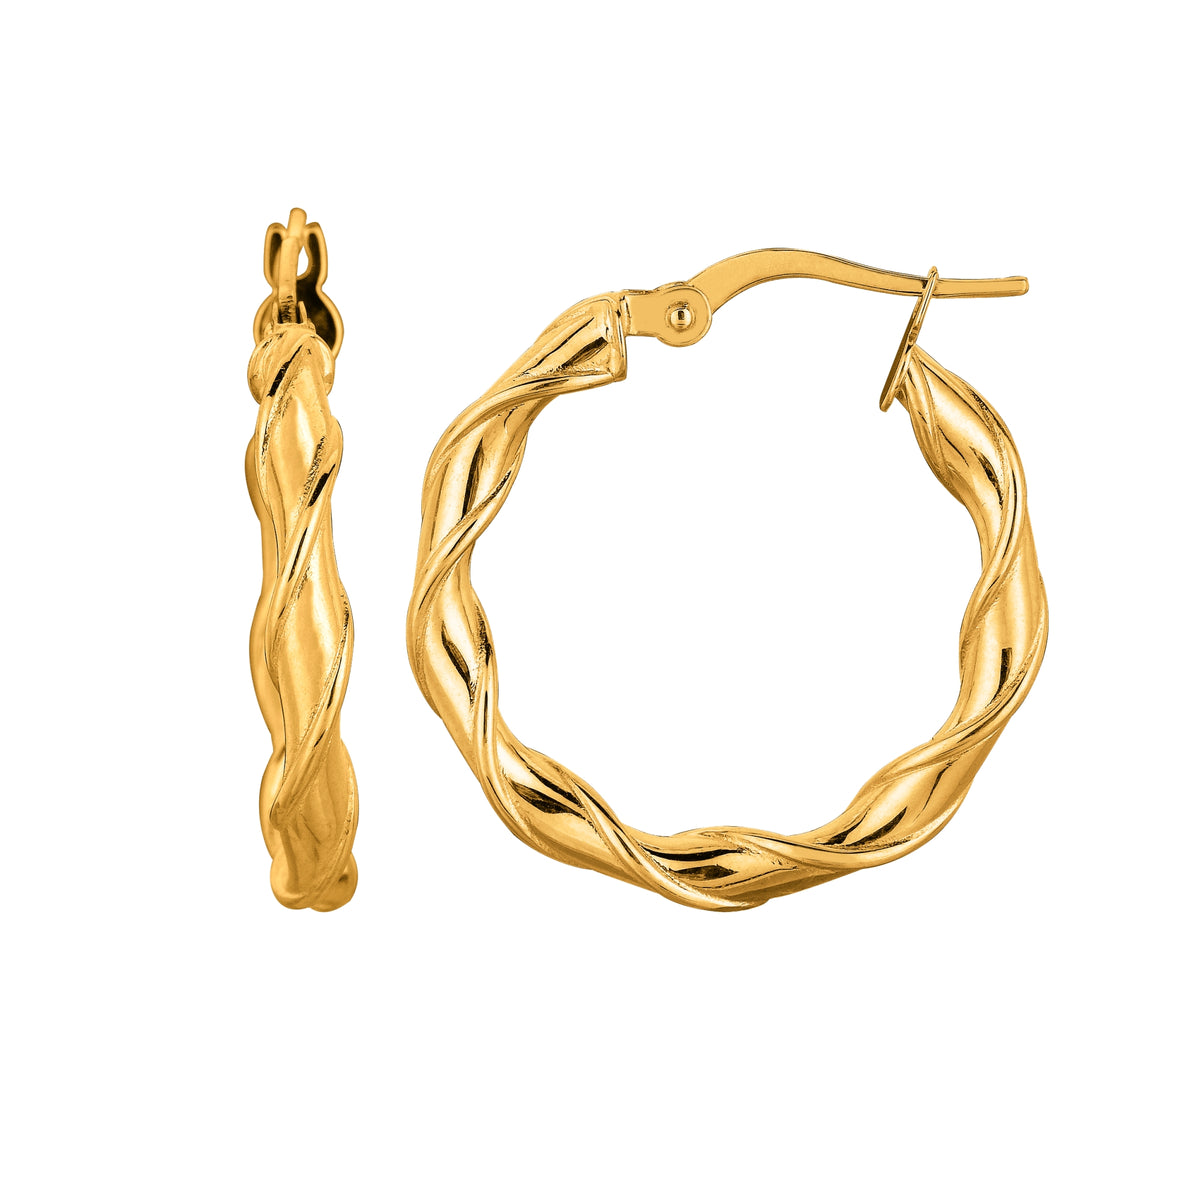 14K Yellow Gold Round Type Twisted Hoop Earrings, Diameter 24mm fine designer jewelry for men and women